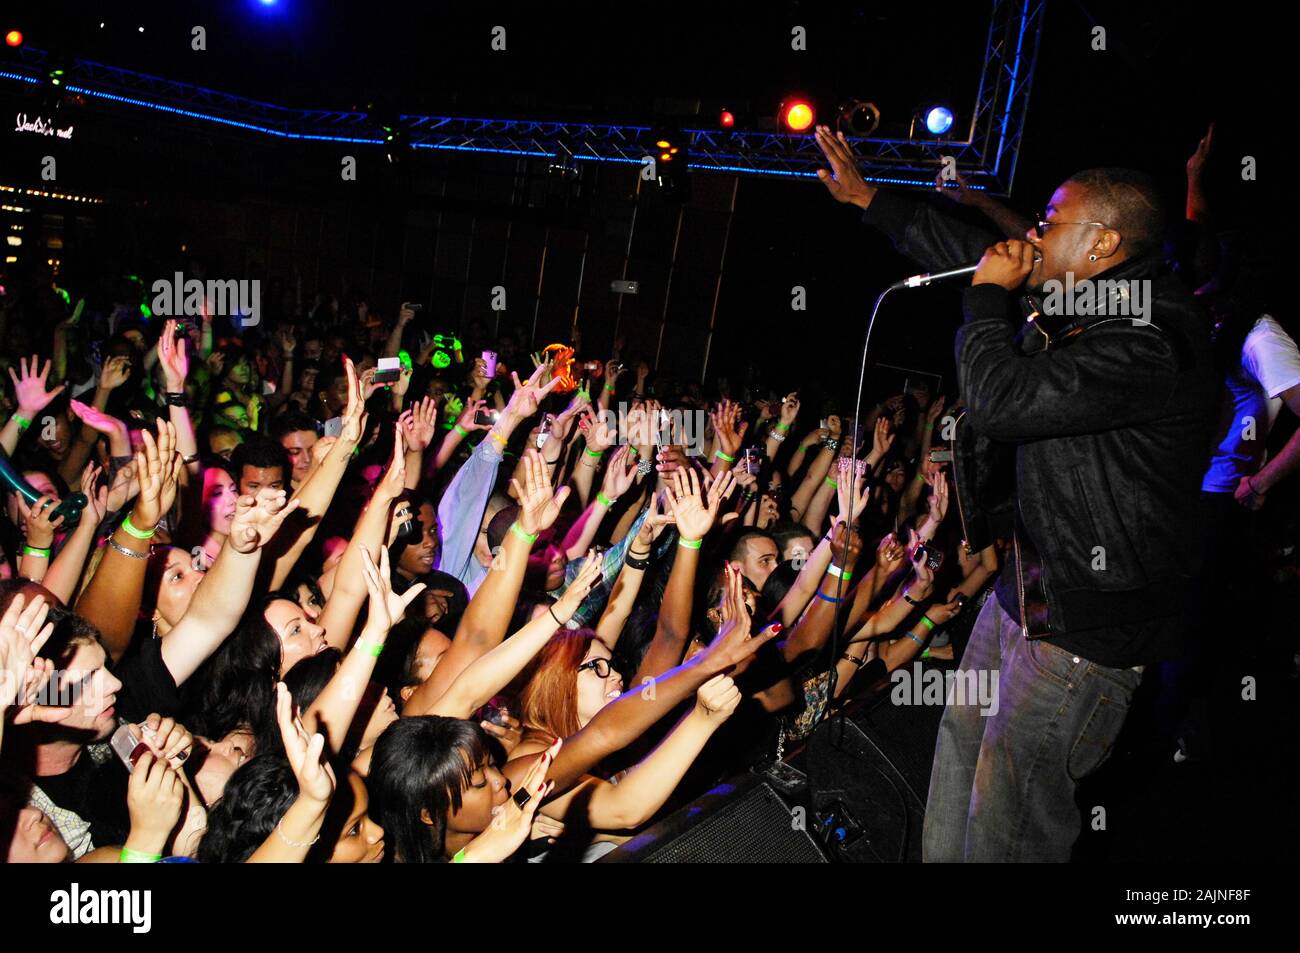 Singer / Actor Ray J on stage performing on May 20, 2010 in Los Angeles, California. Stock Photo